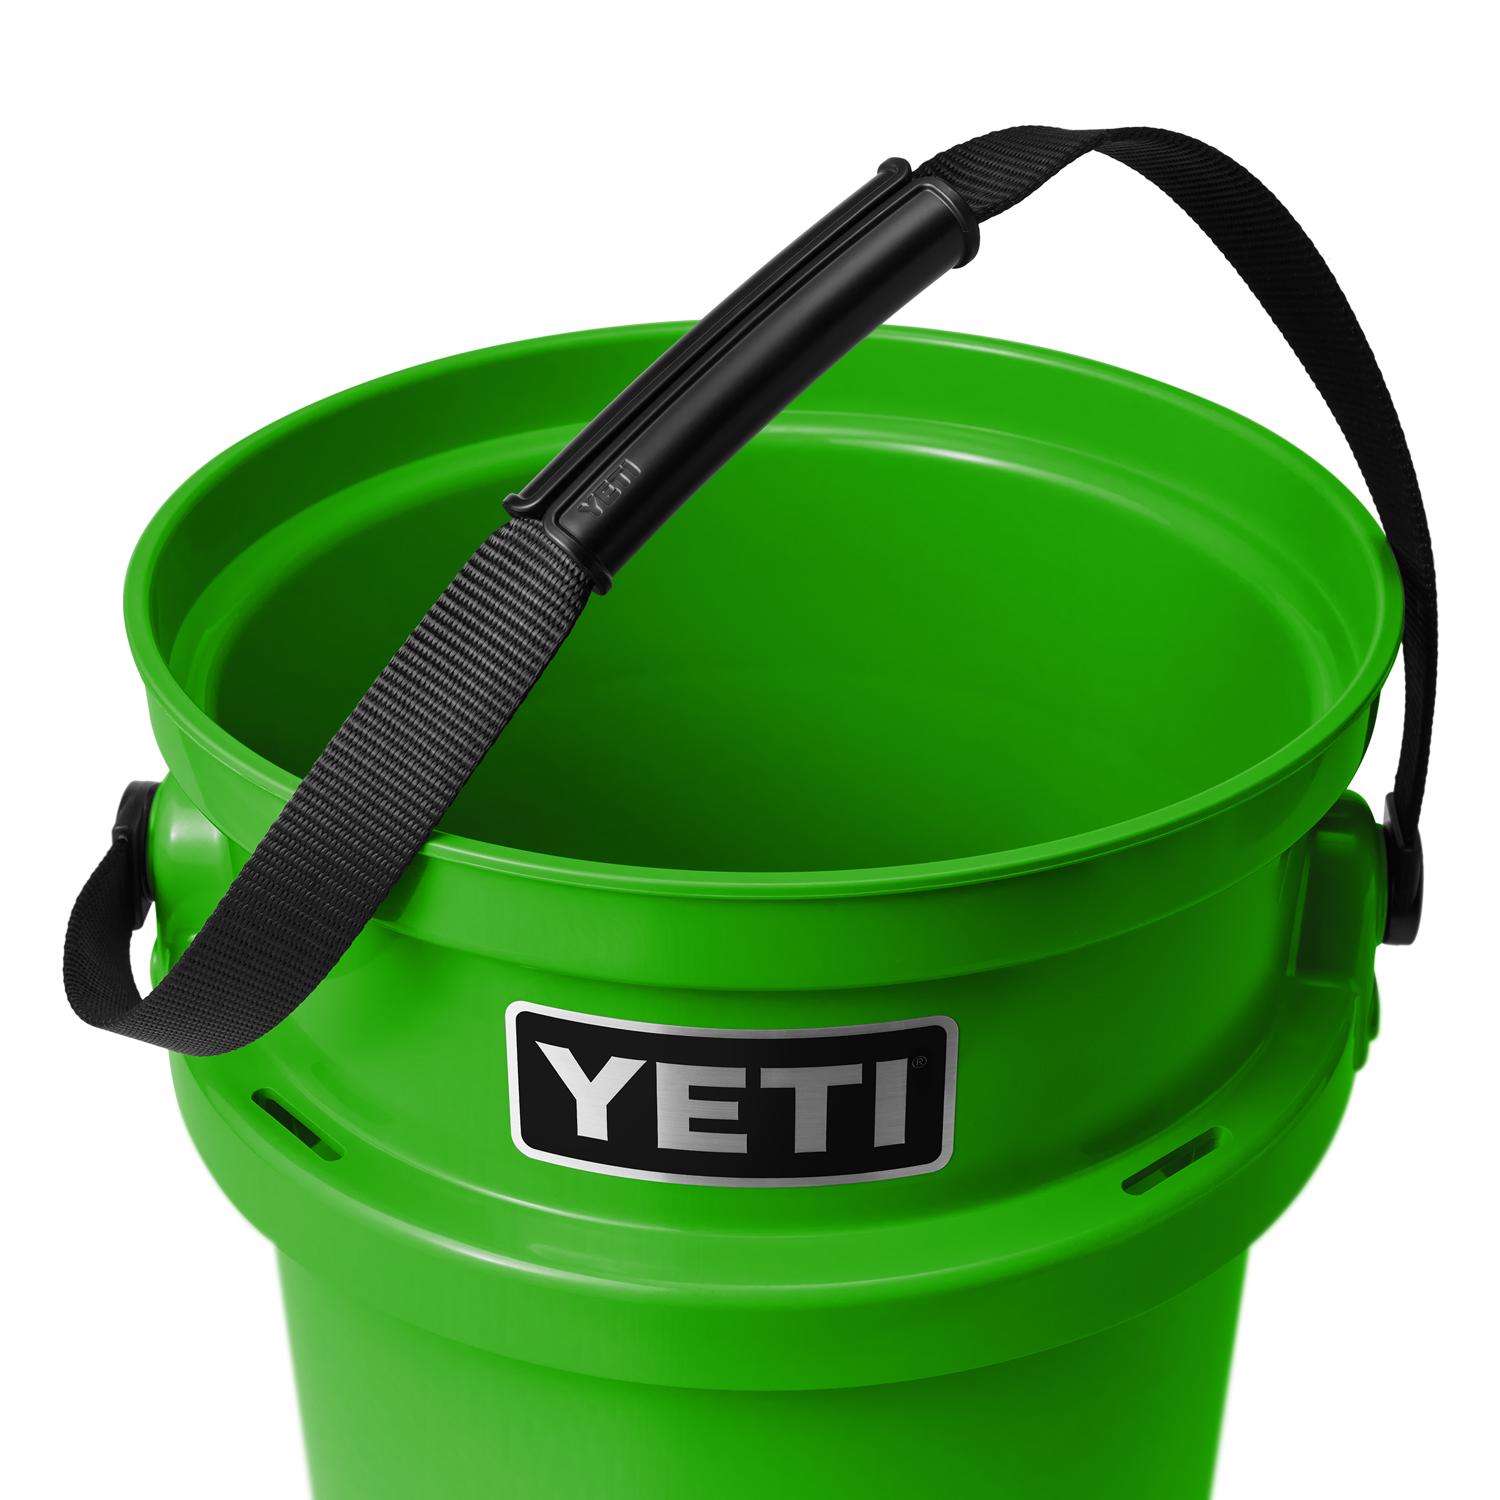 Ace of Gray on X: The LoadOut Bucket Special is still going on! Get a Yeti  LoadOut 5Gal Bucket of your choice, a Utility Gear Belt, a LoadOut Caddy,  and a Honey